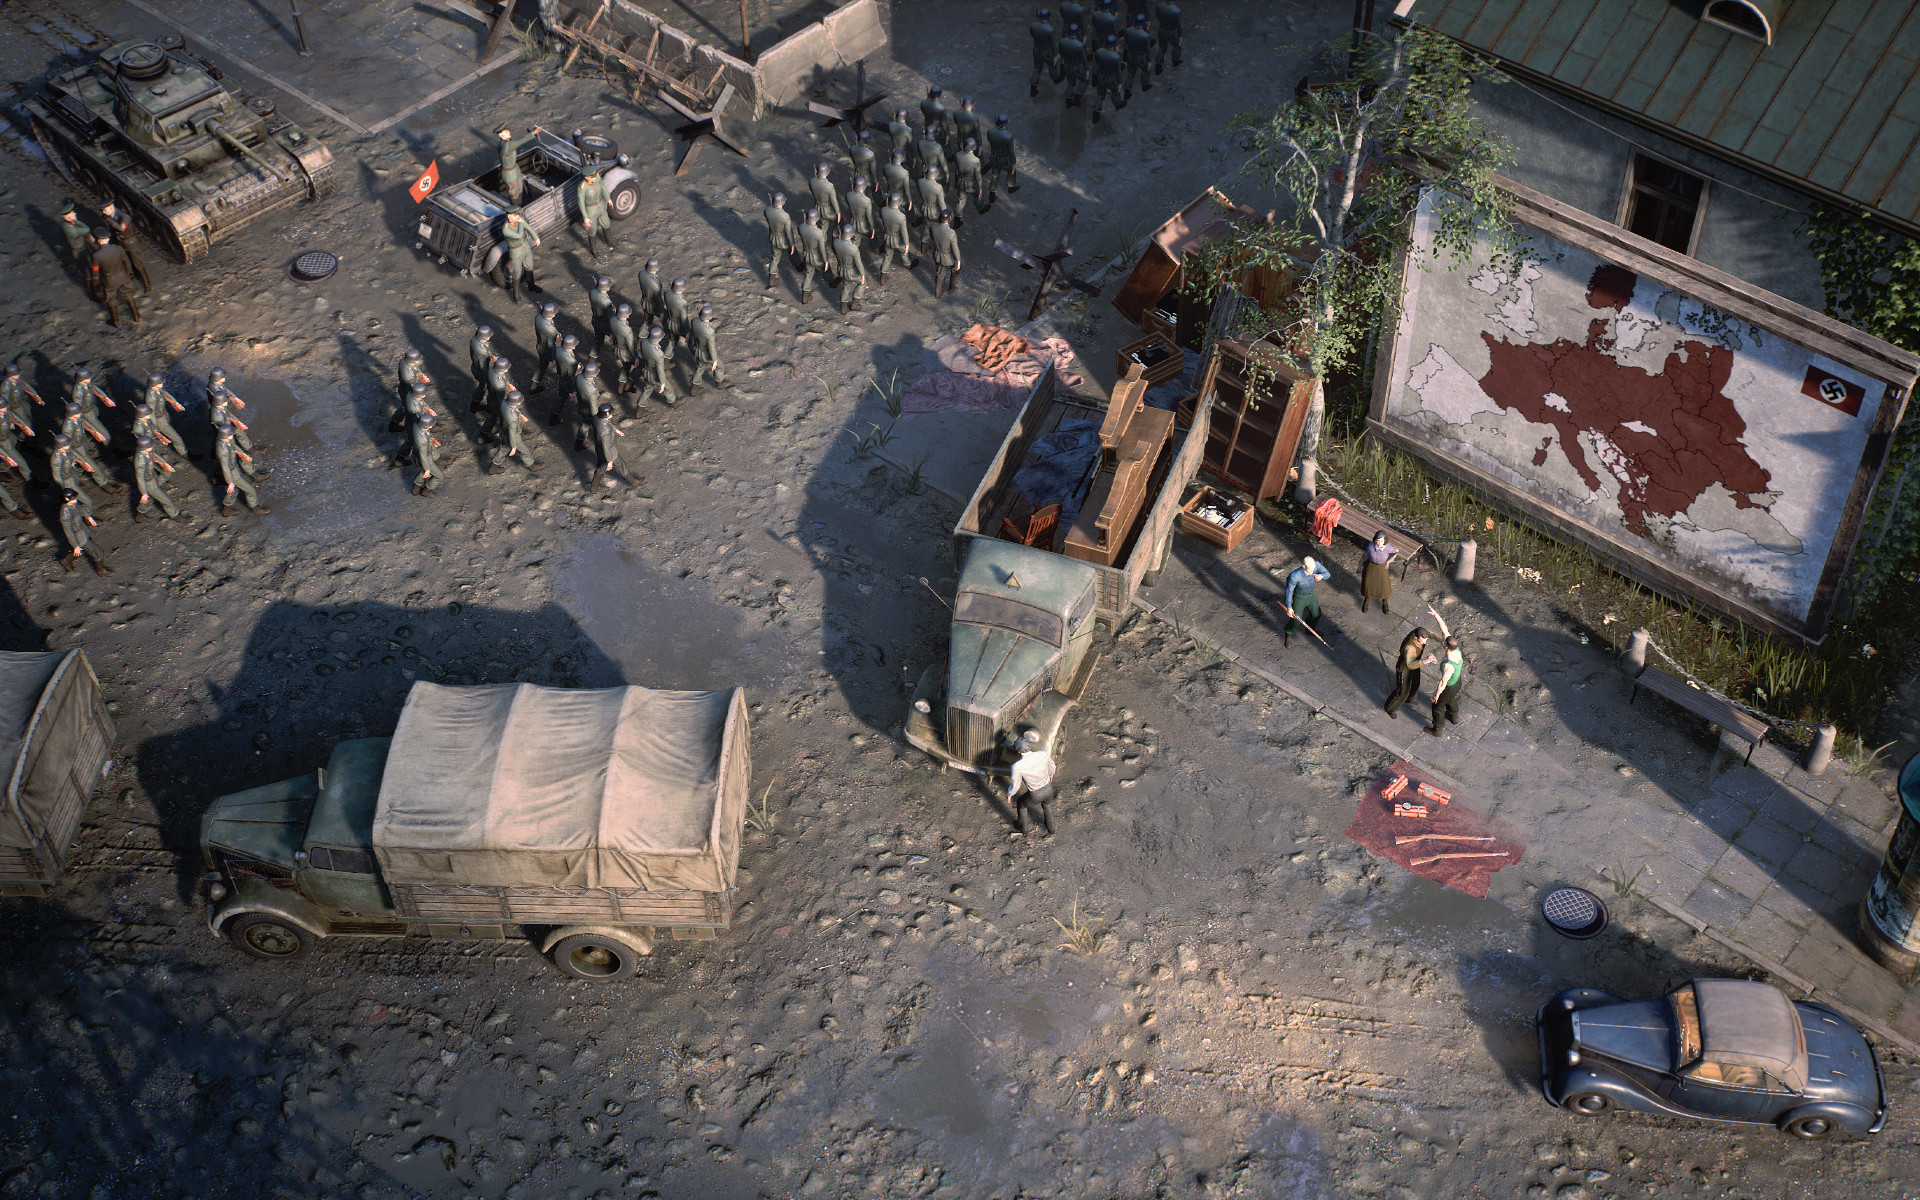 War Mongrels Is An Upcoming RTS Set In World War 2 Set To Release In 2021 From Destructive Creations